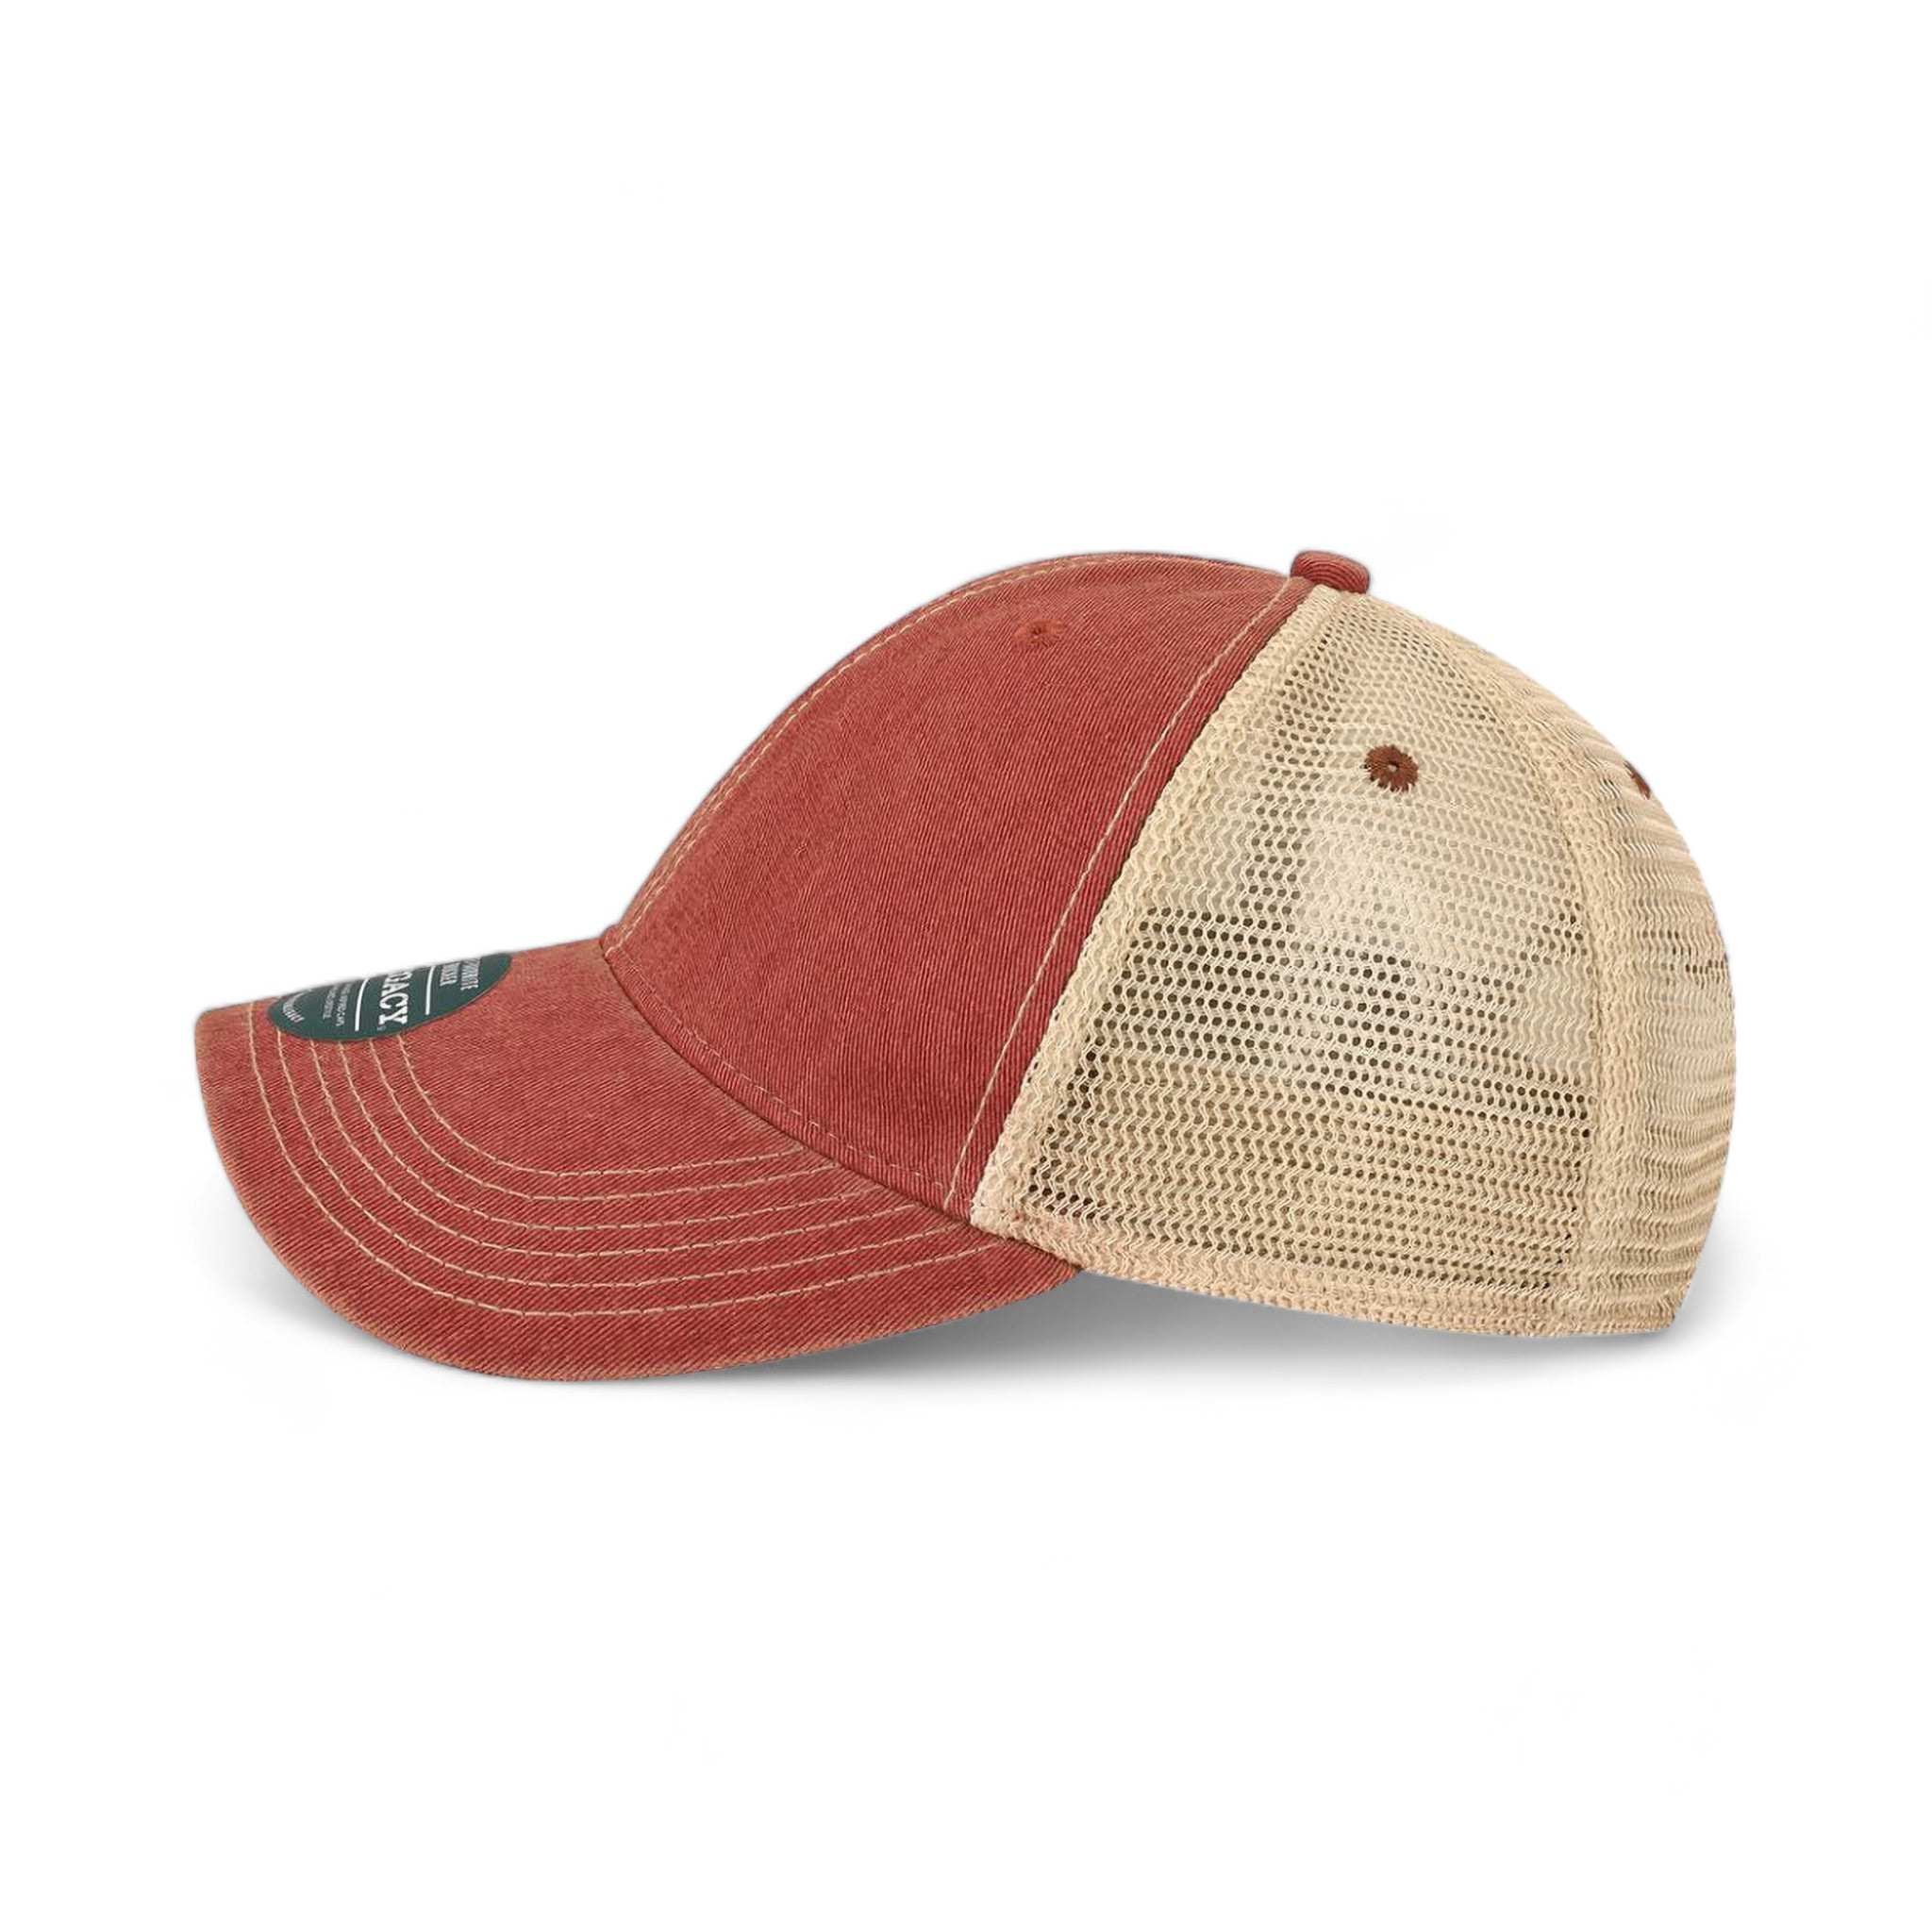 Side view of LEGACY OFAY custom hat in cardinal and khaki